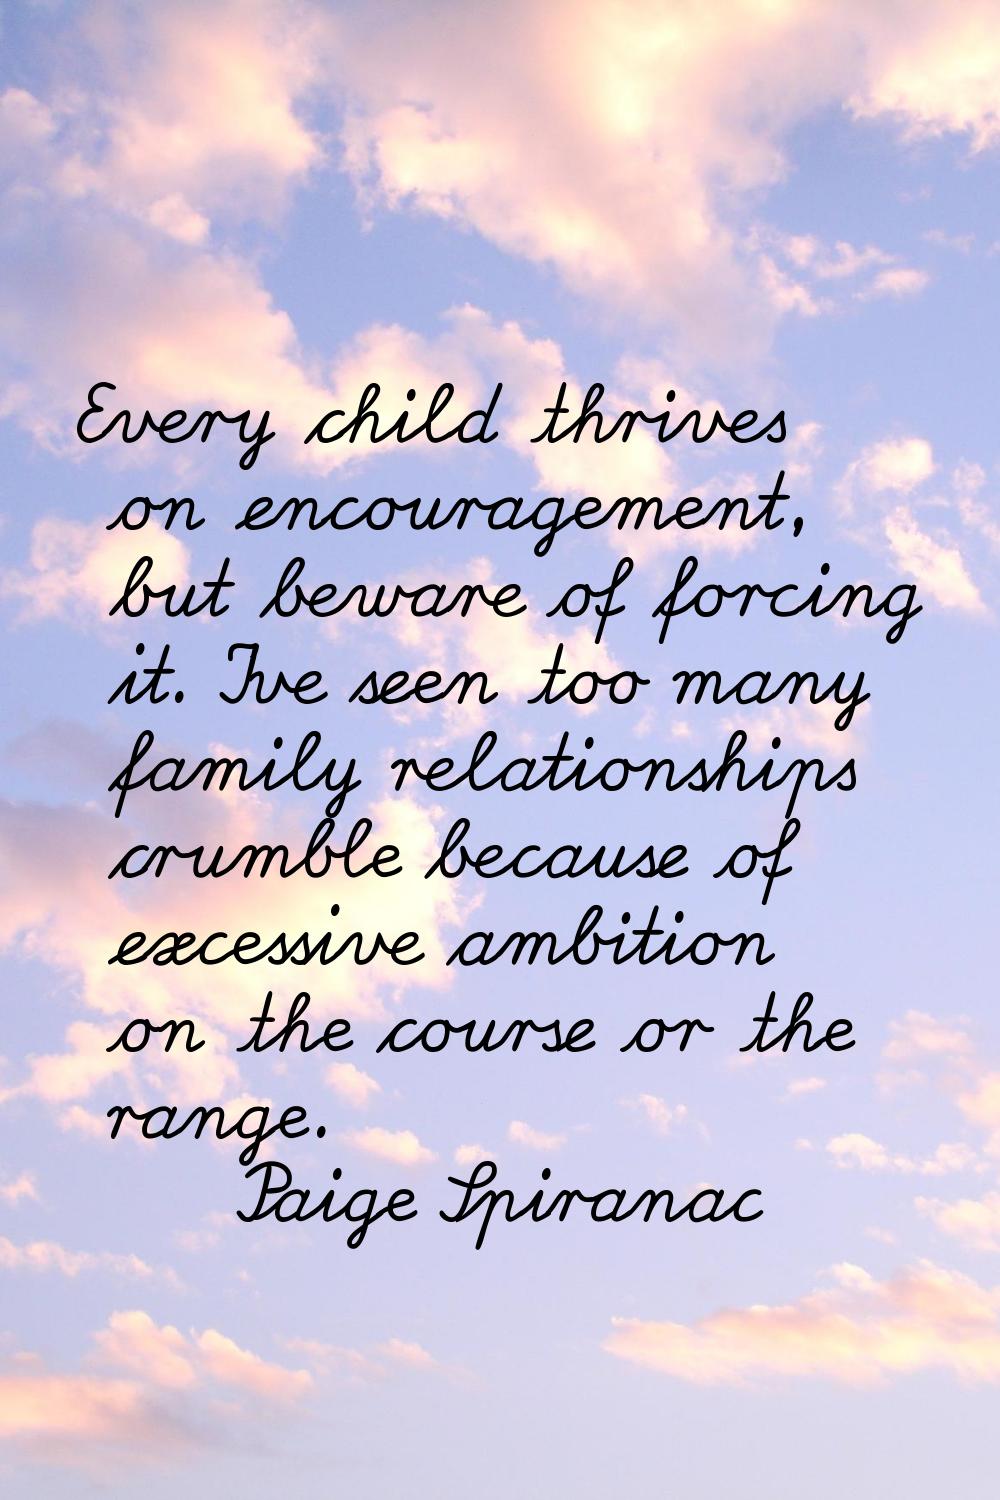 Every child thrives on encouragement, but beware of forcing it. I've seen too many family relations